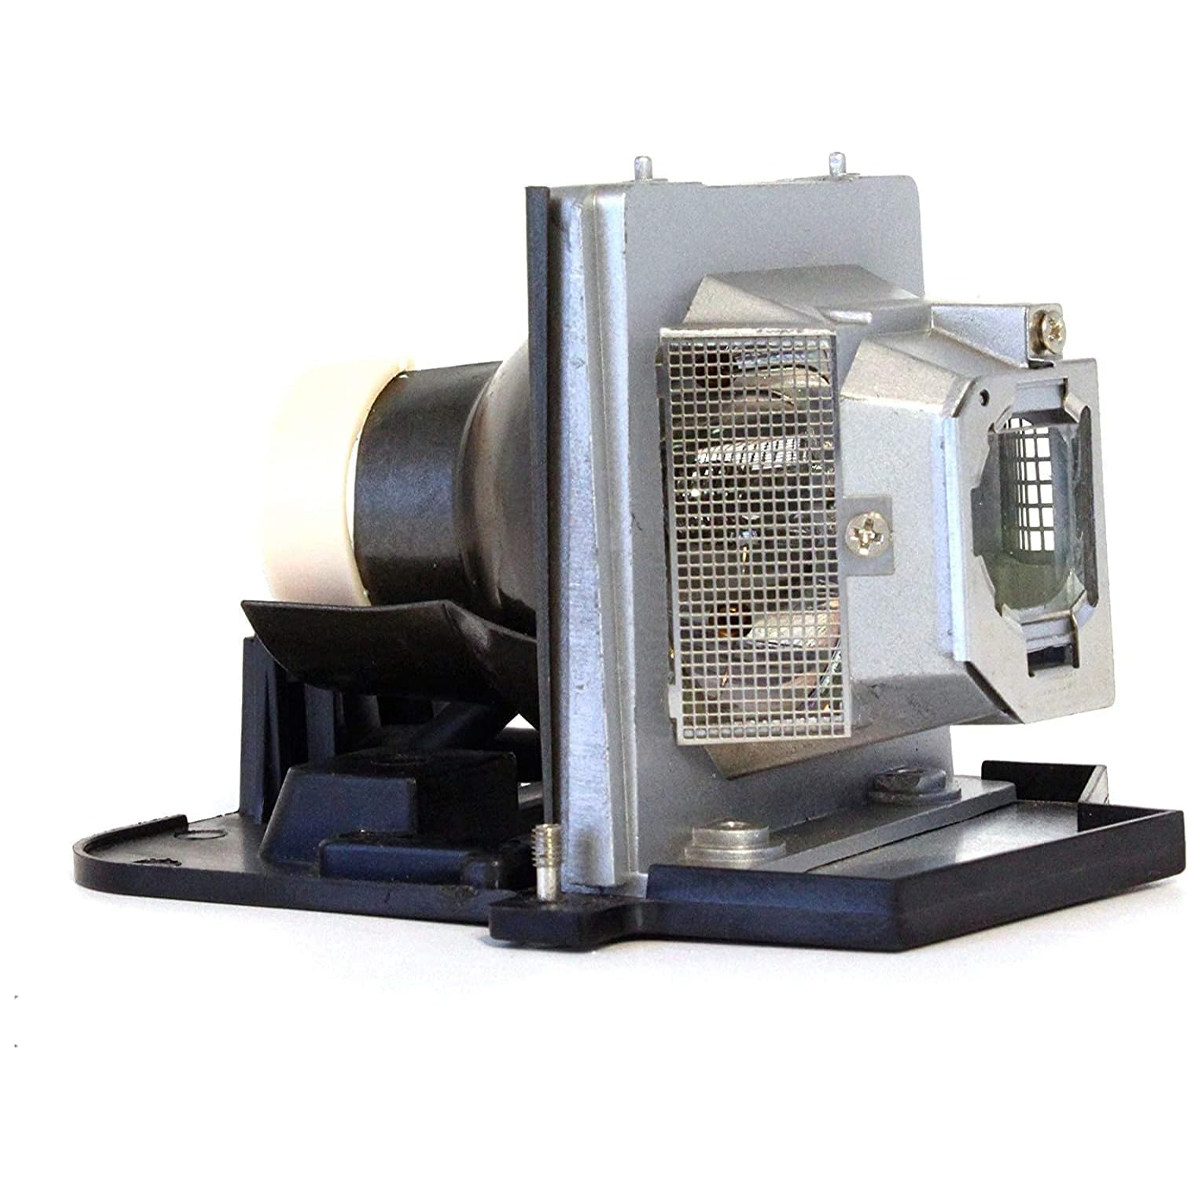 Replacement Projector lamp 1800MP/725-10106/MJ815 For DELL 1800MP